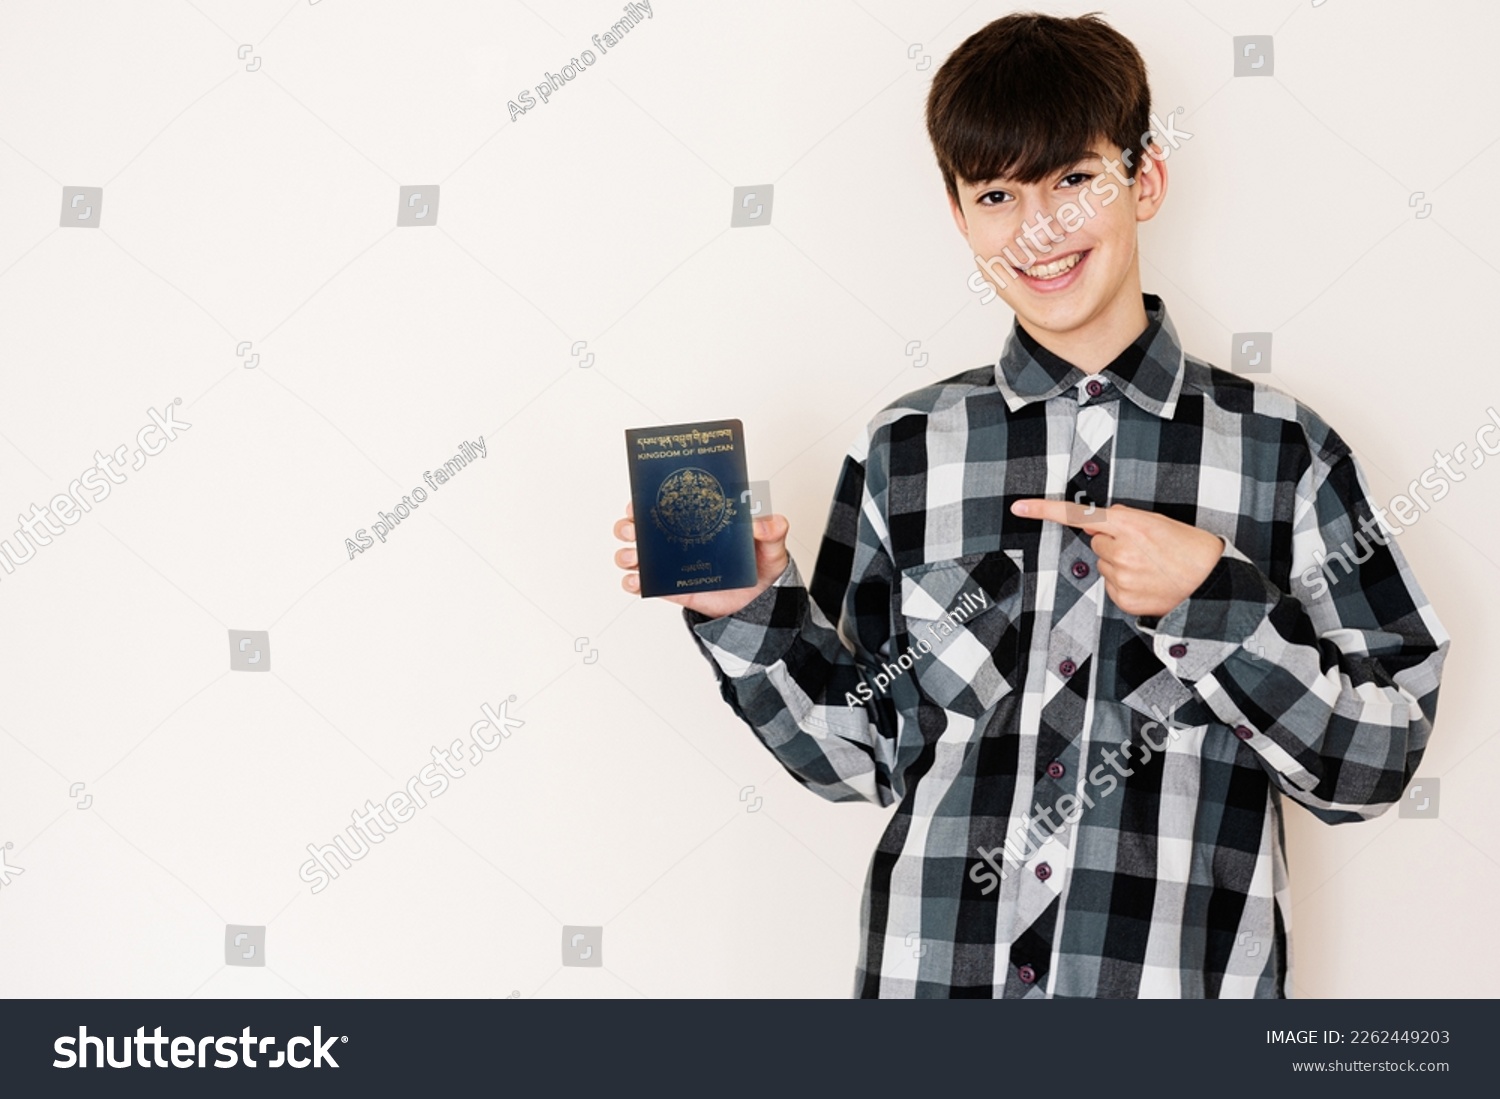 Young teenager boy holding Bhutan passport looking positive and happy standing and smiling with a confident smile against white background. #2262449203